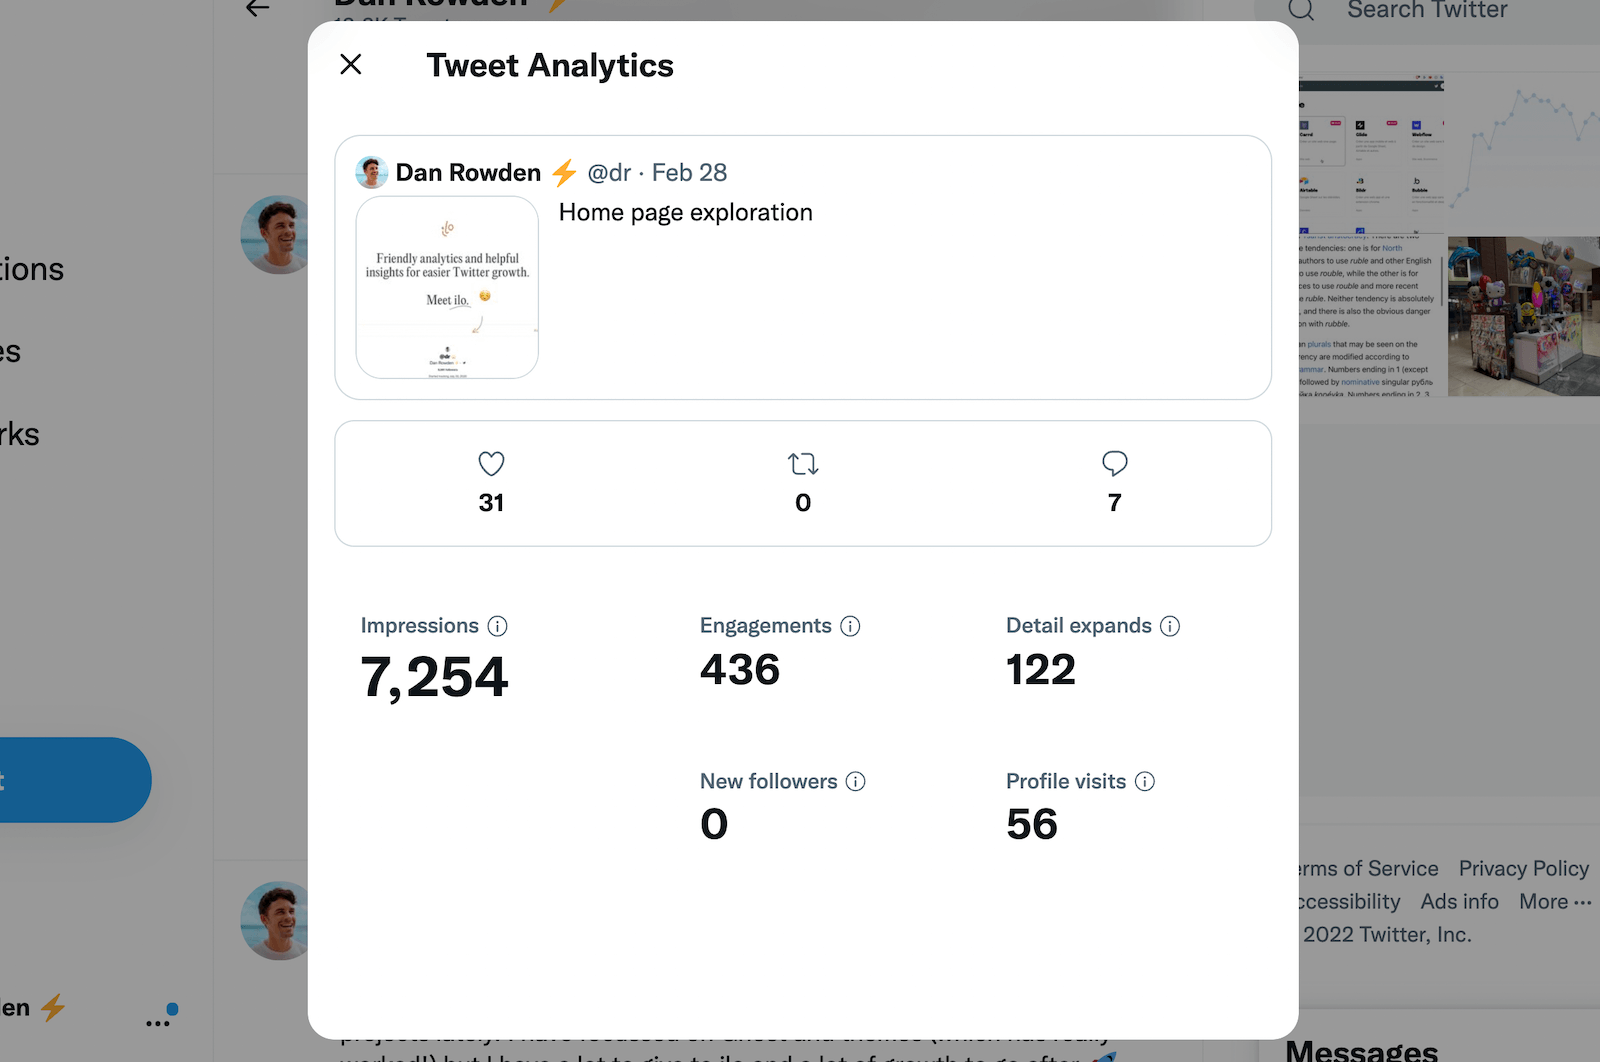 How to view analytics metrics for a single tweet